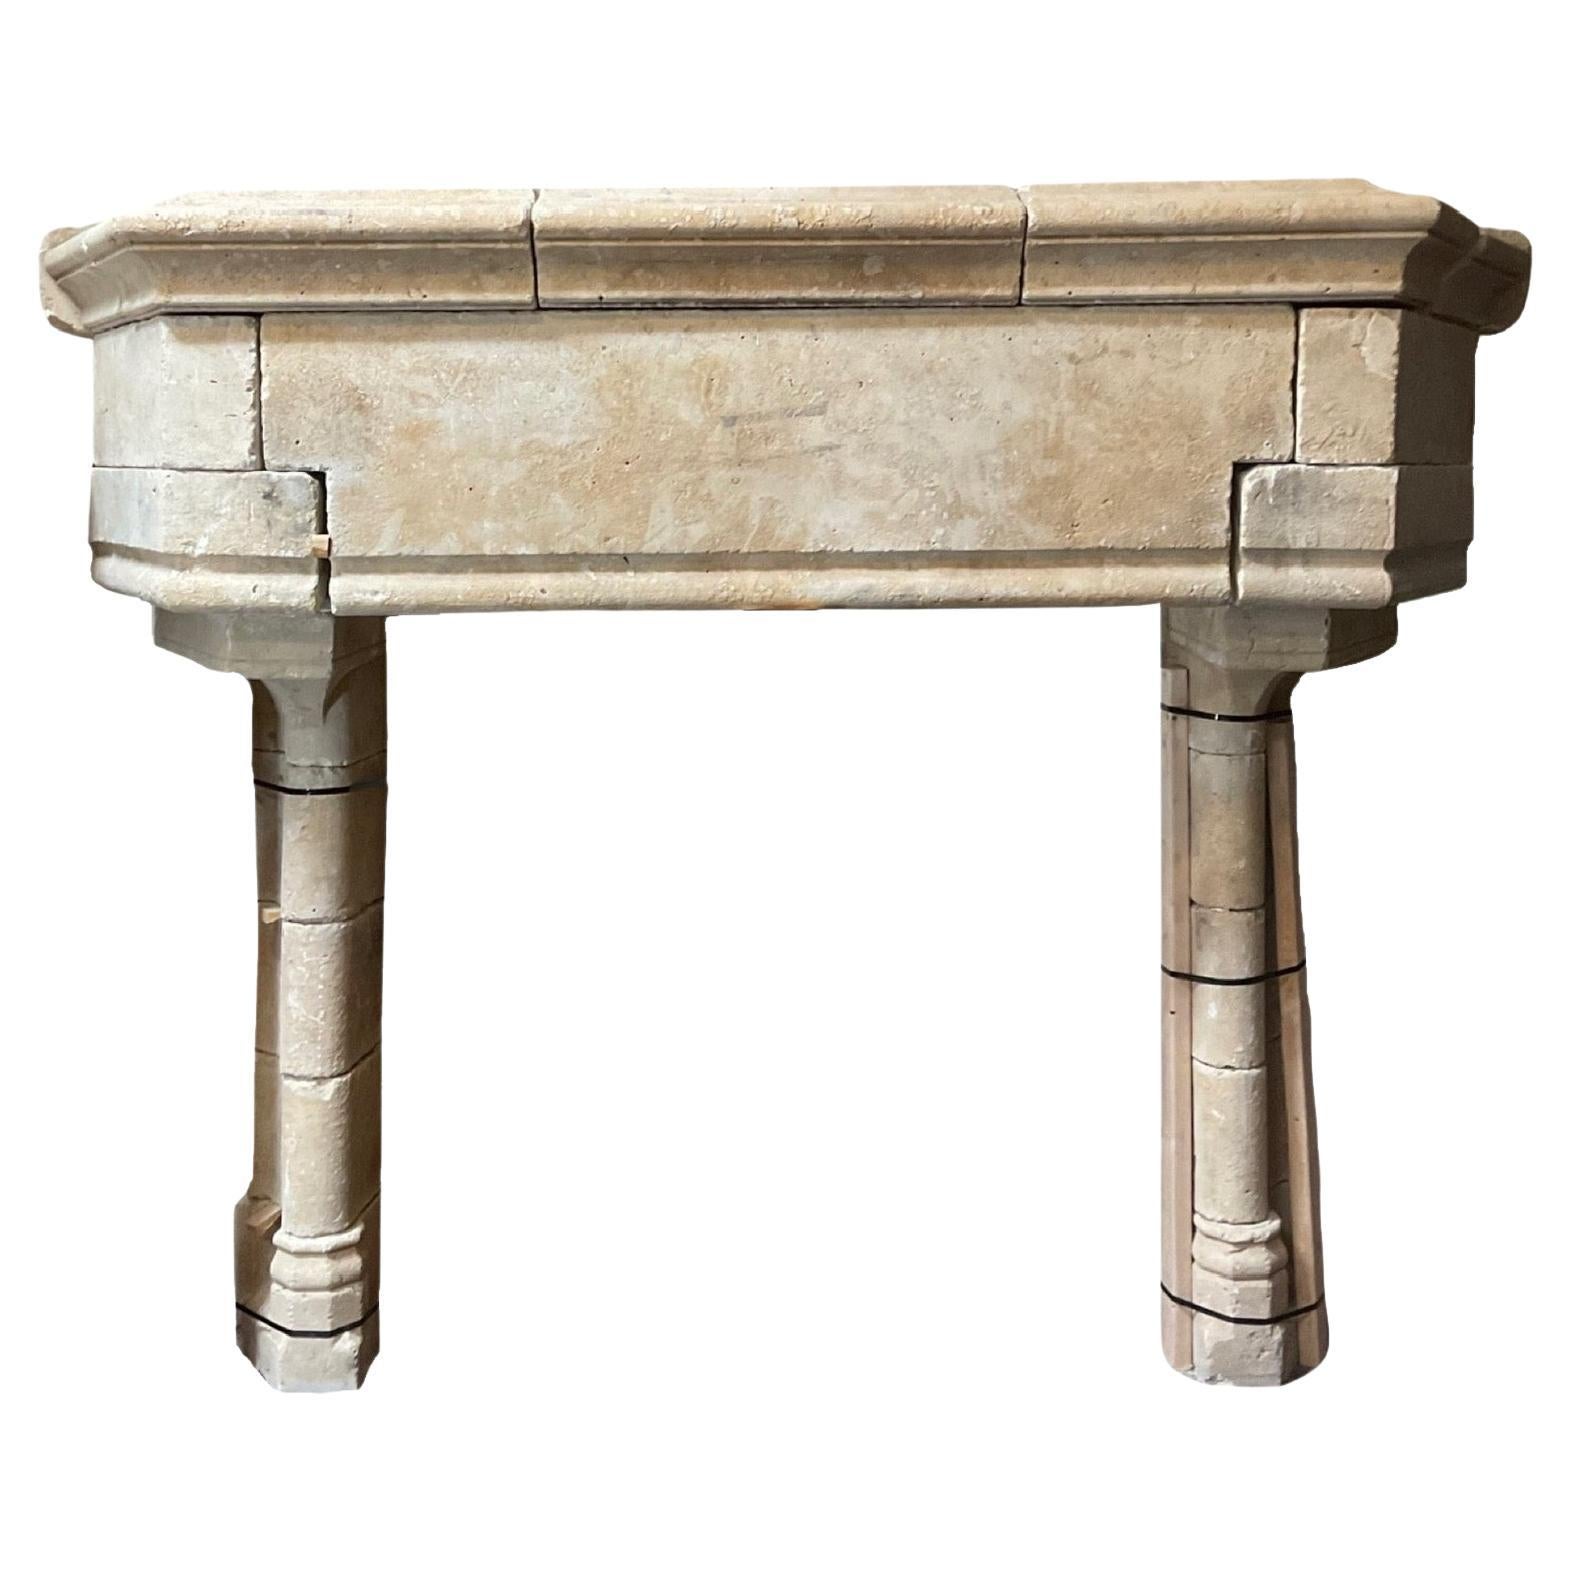 This 17th century mantel is crafted from French limestone, offering a timeless and durable aesthetic for any home. Its large size is perfect for a statement piece in any room. Enjoy the longevity and elegance of this Fine French limestone mantel.